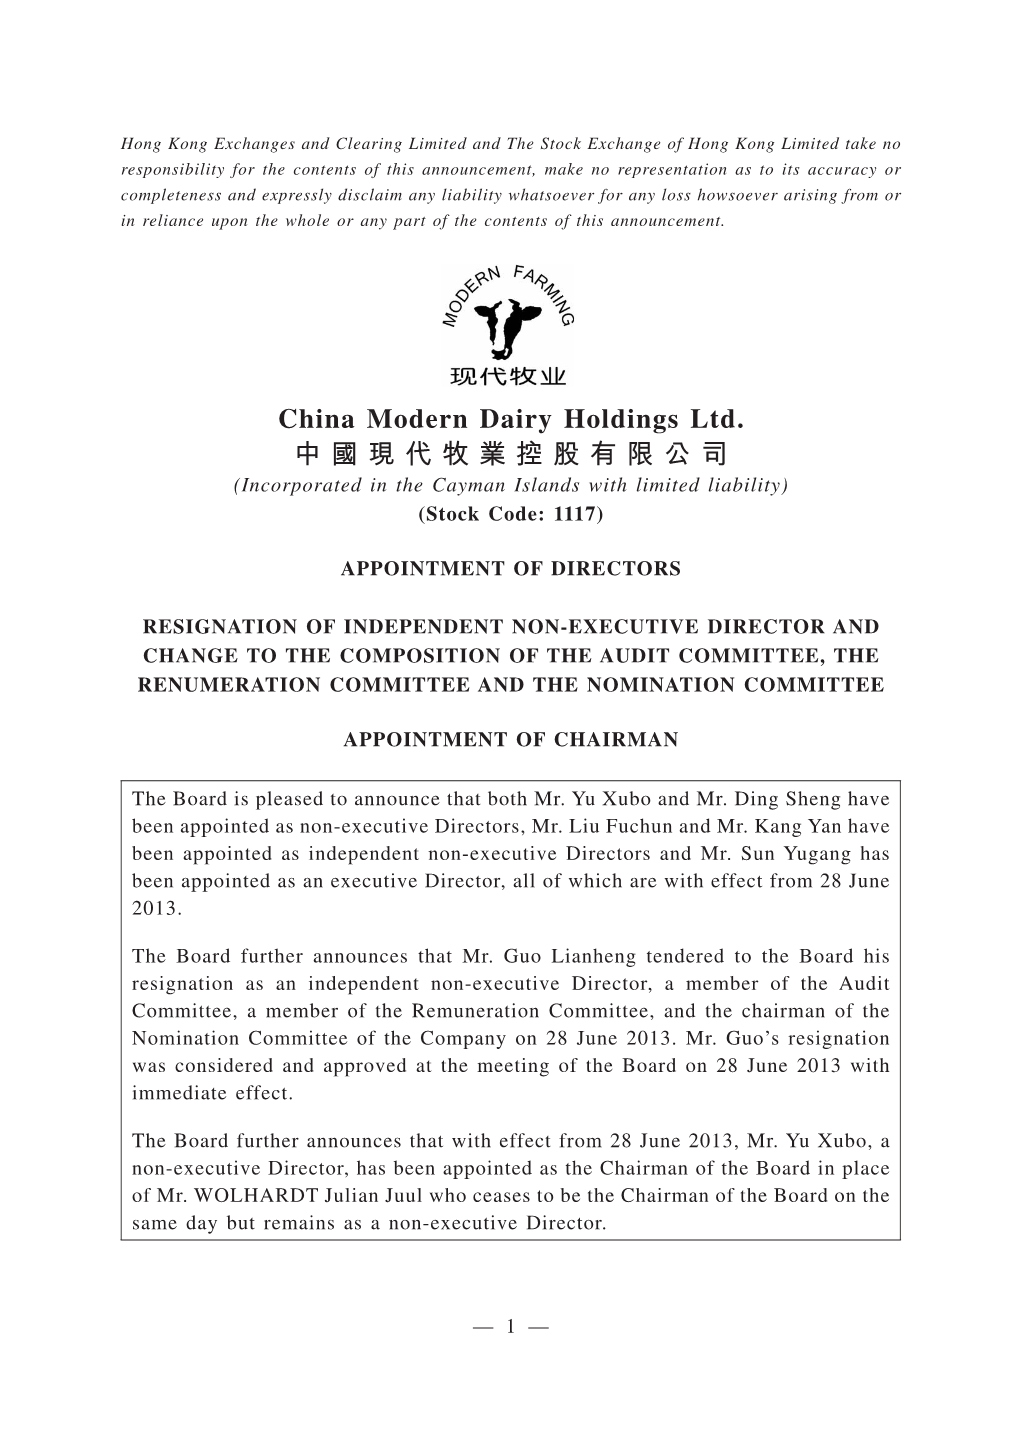 China Modern Dairy Holdings Ltd. 中國現代牧業控股有限公司 (Incorporated in the Cayman Islands with Limited Liability) (Stock Code: 1117)